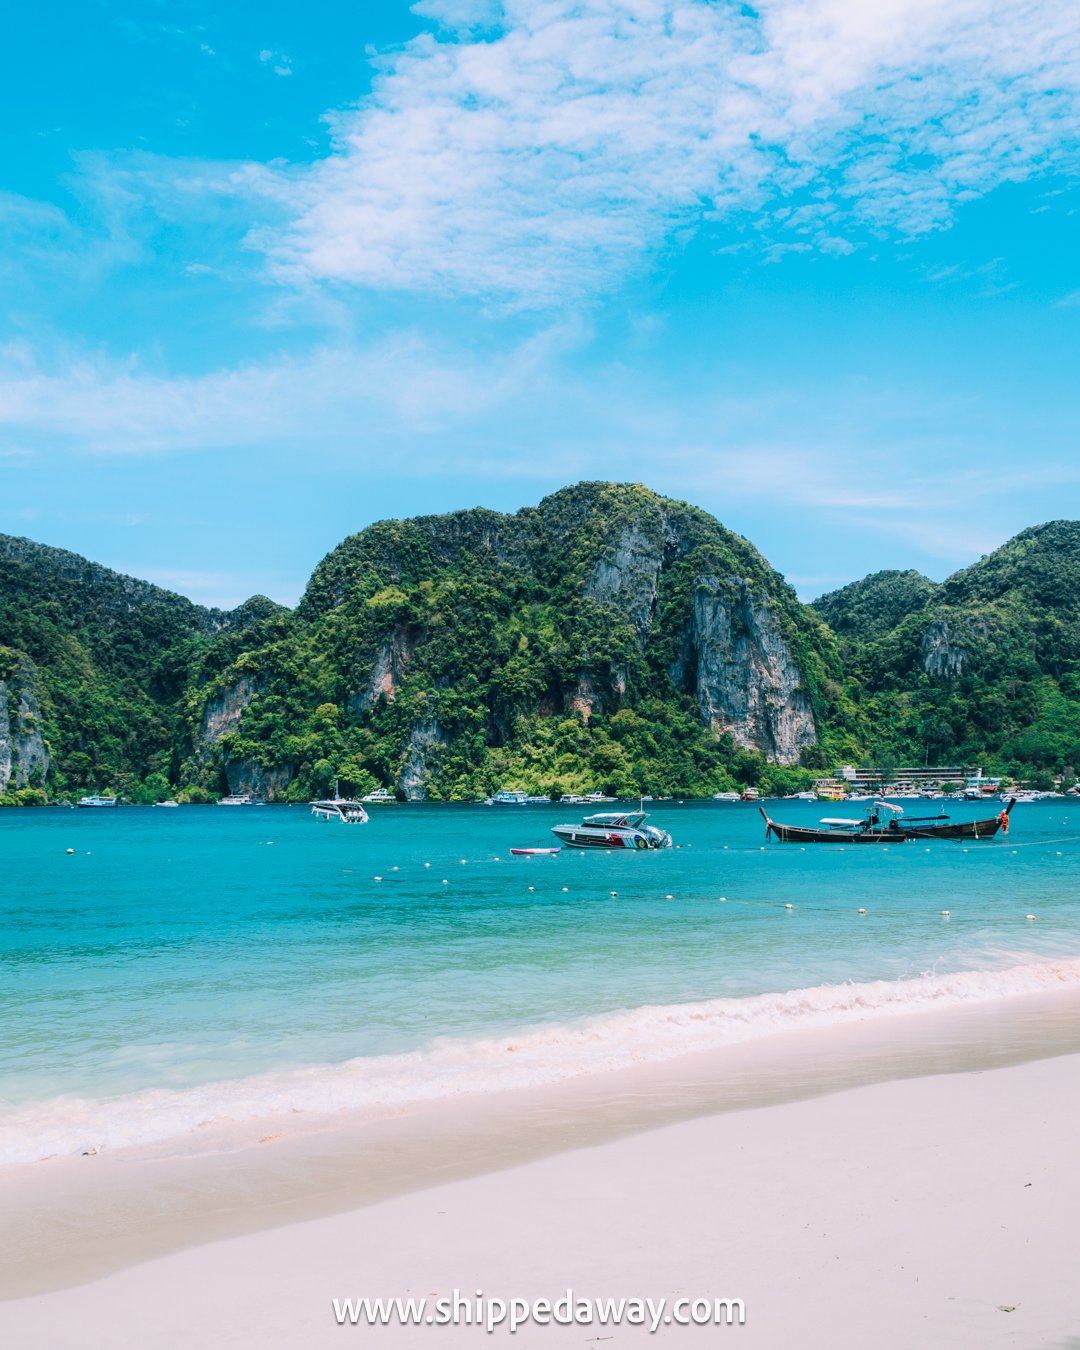 Sunny day on the beach in Phi Phi Islands